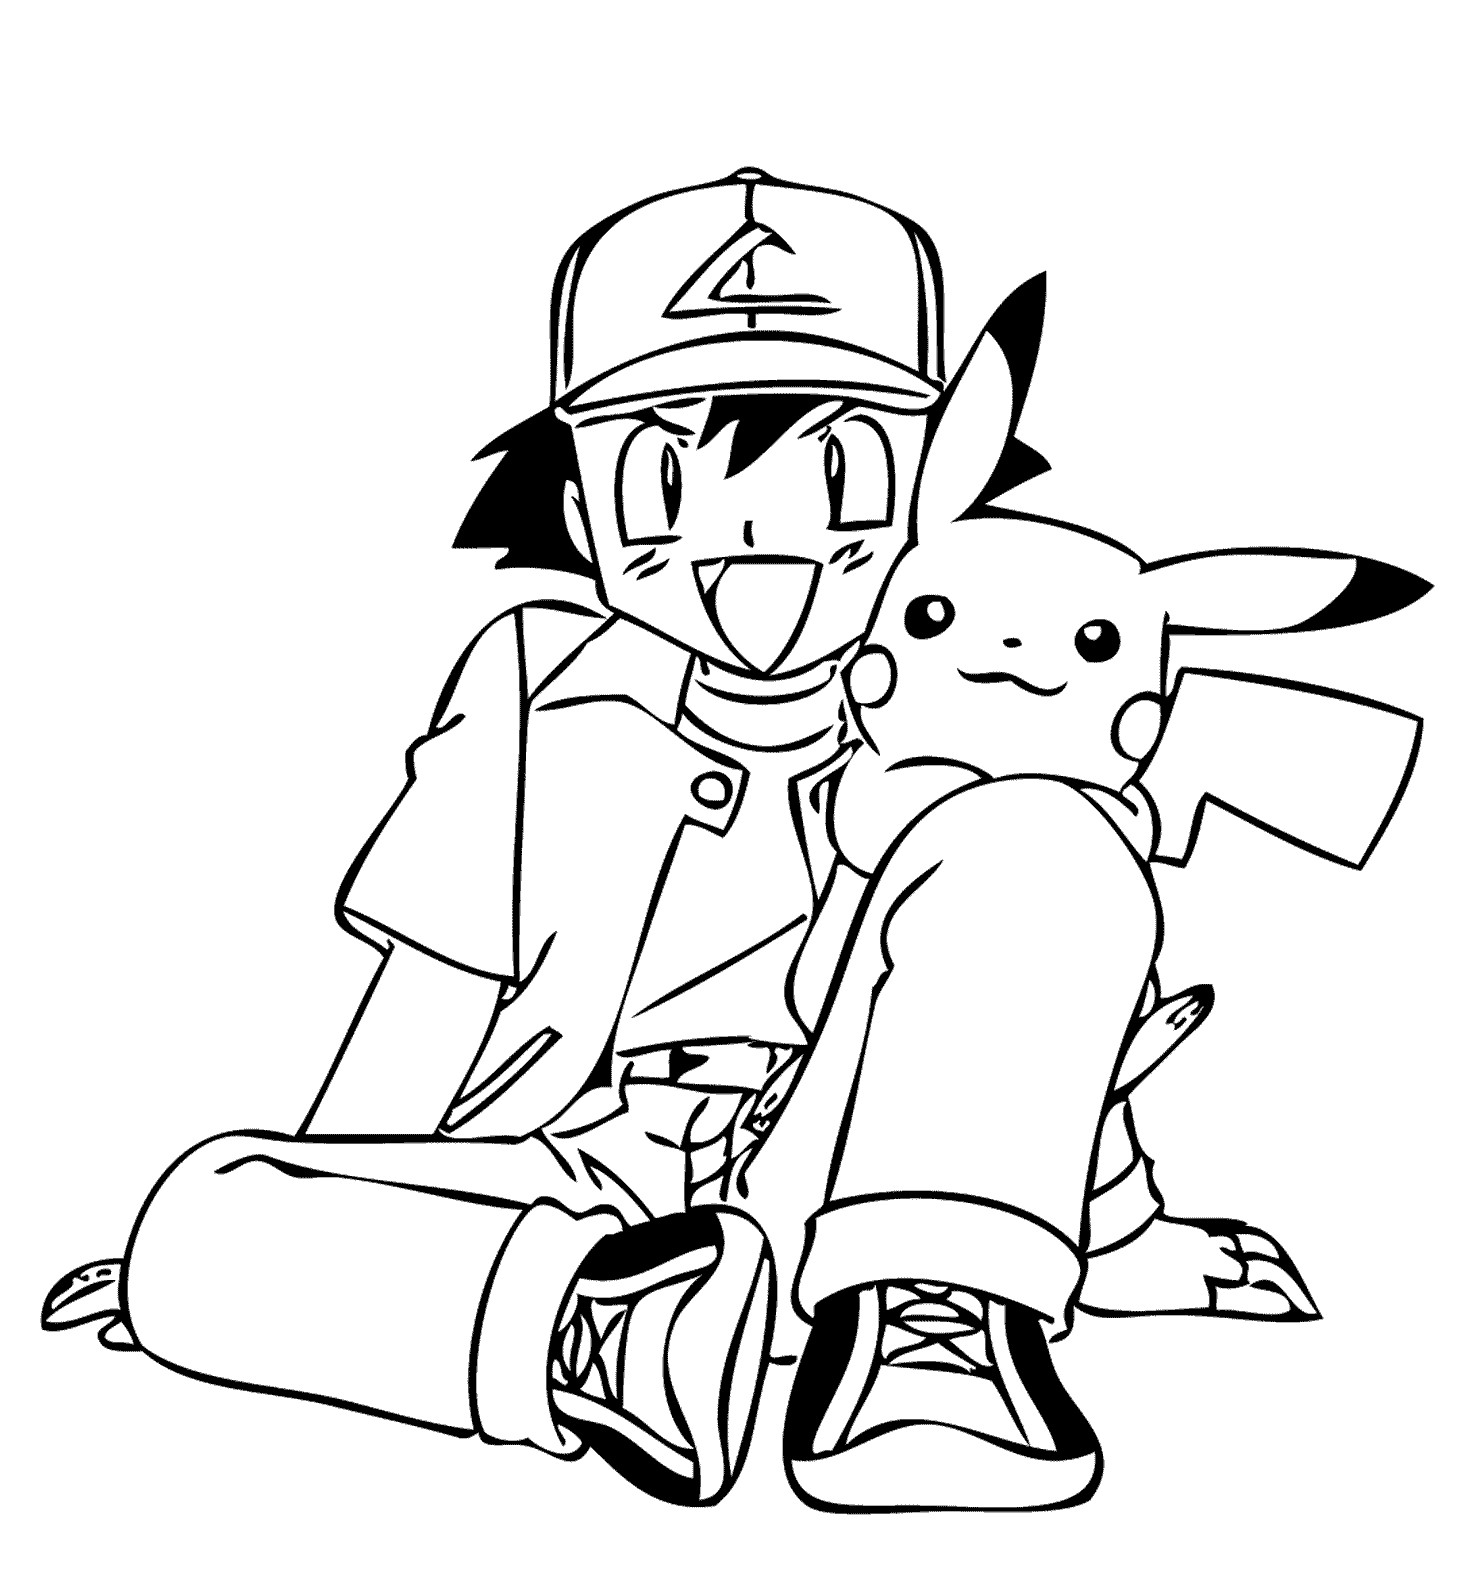 Coloring Pages For Boys Pokemon
 Friends from Pokemon anime coloring pages for kids